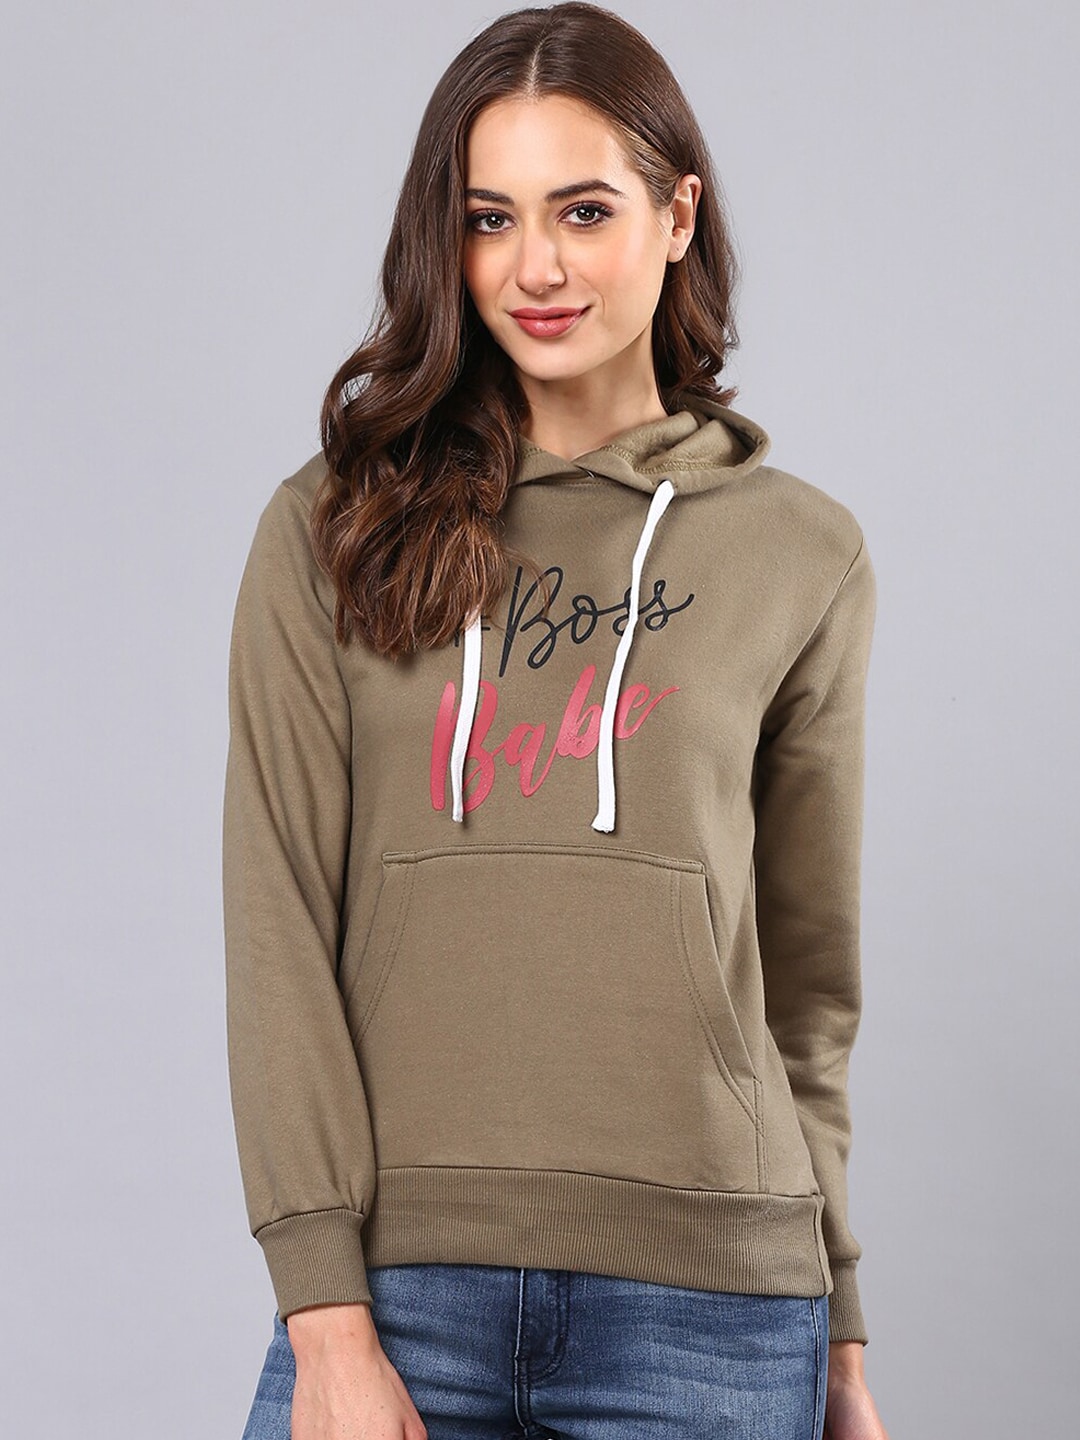 Campus Sutra Women Olive Green Typography Printed Hooded Sweatshirt Price in India